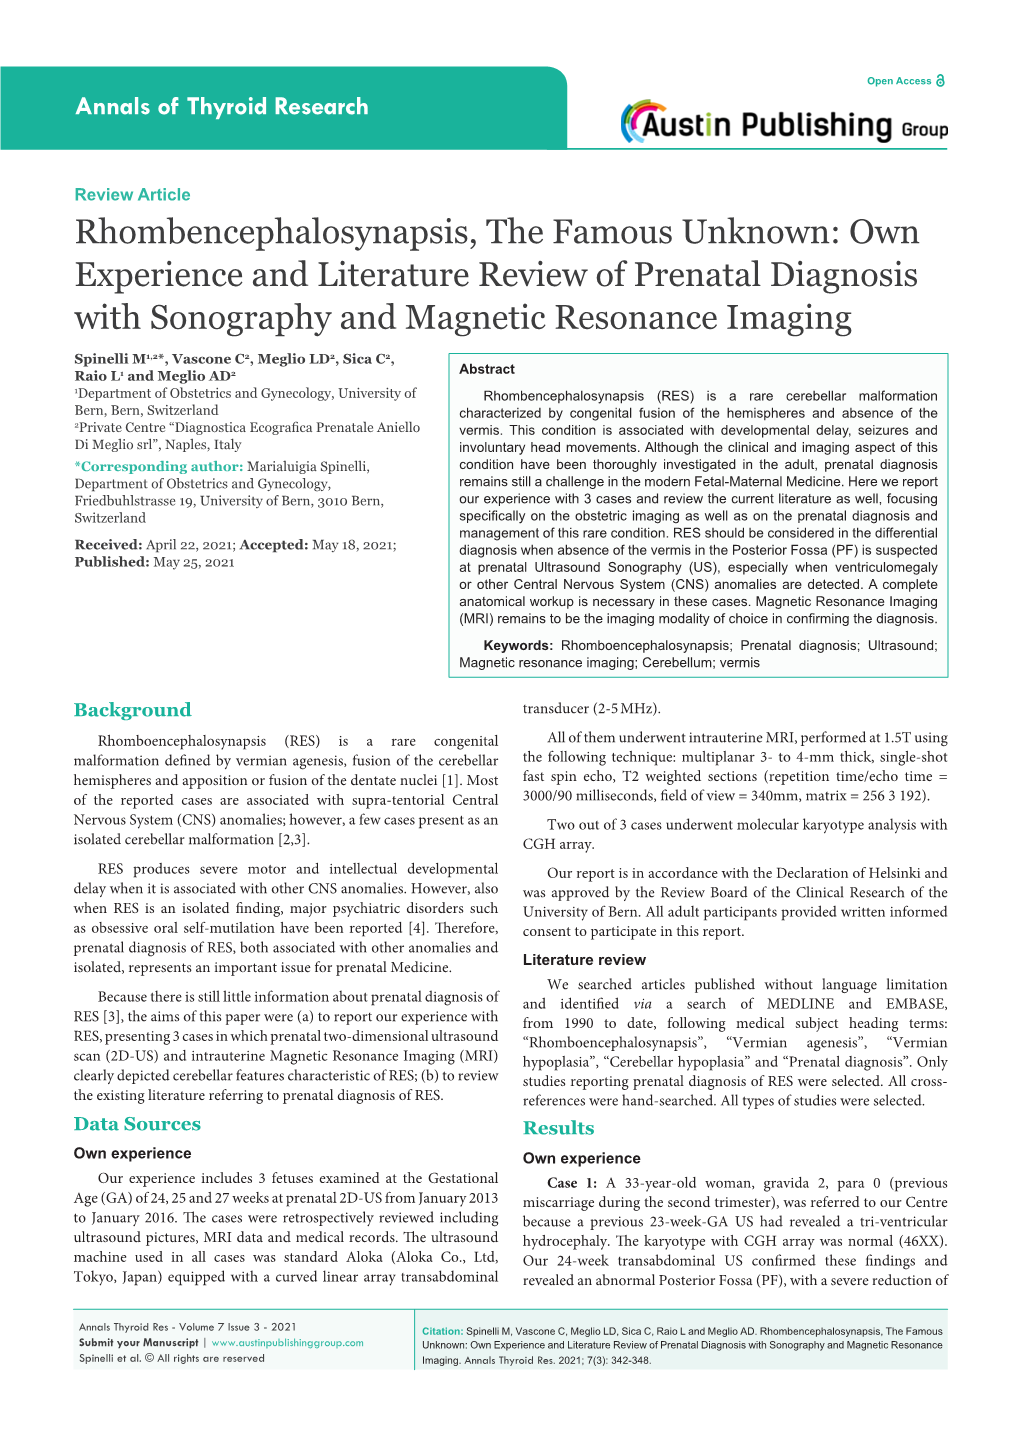 Rhombencephalosynapsis, the Famous Unknown: Own Experience and Literature Review of Prenatal Diagnosis with Sonography and Magnetic Resonance Imaging